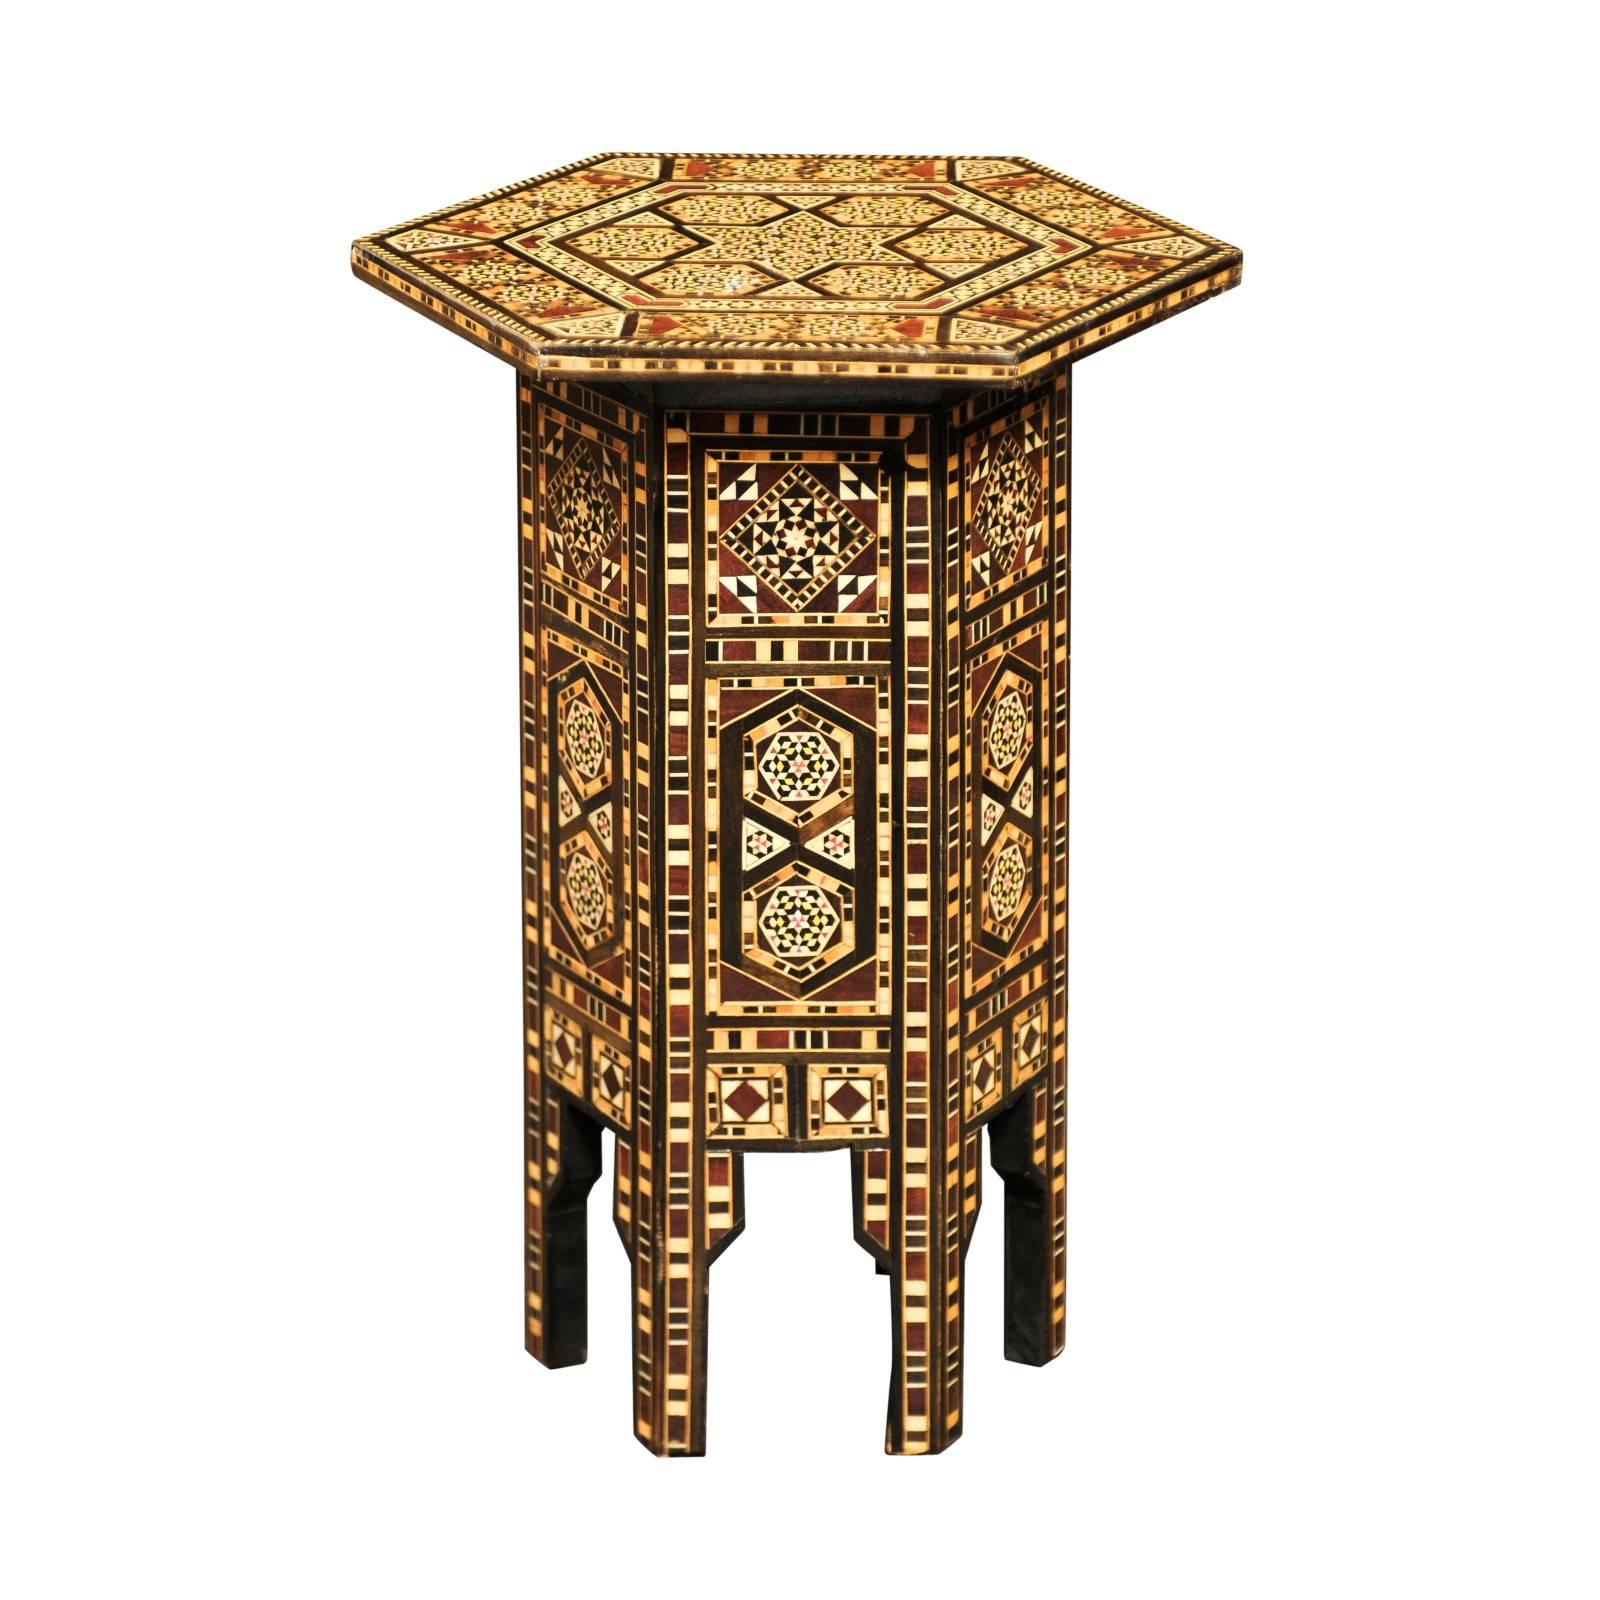 Inlaid Moroccan Petite Size Drinks Table with Wood and Bone Inlay, Mid-Century